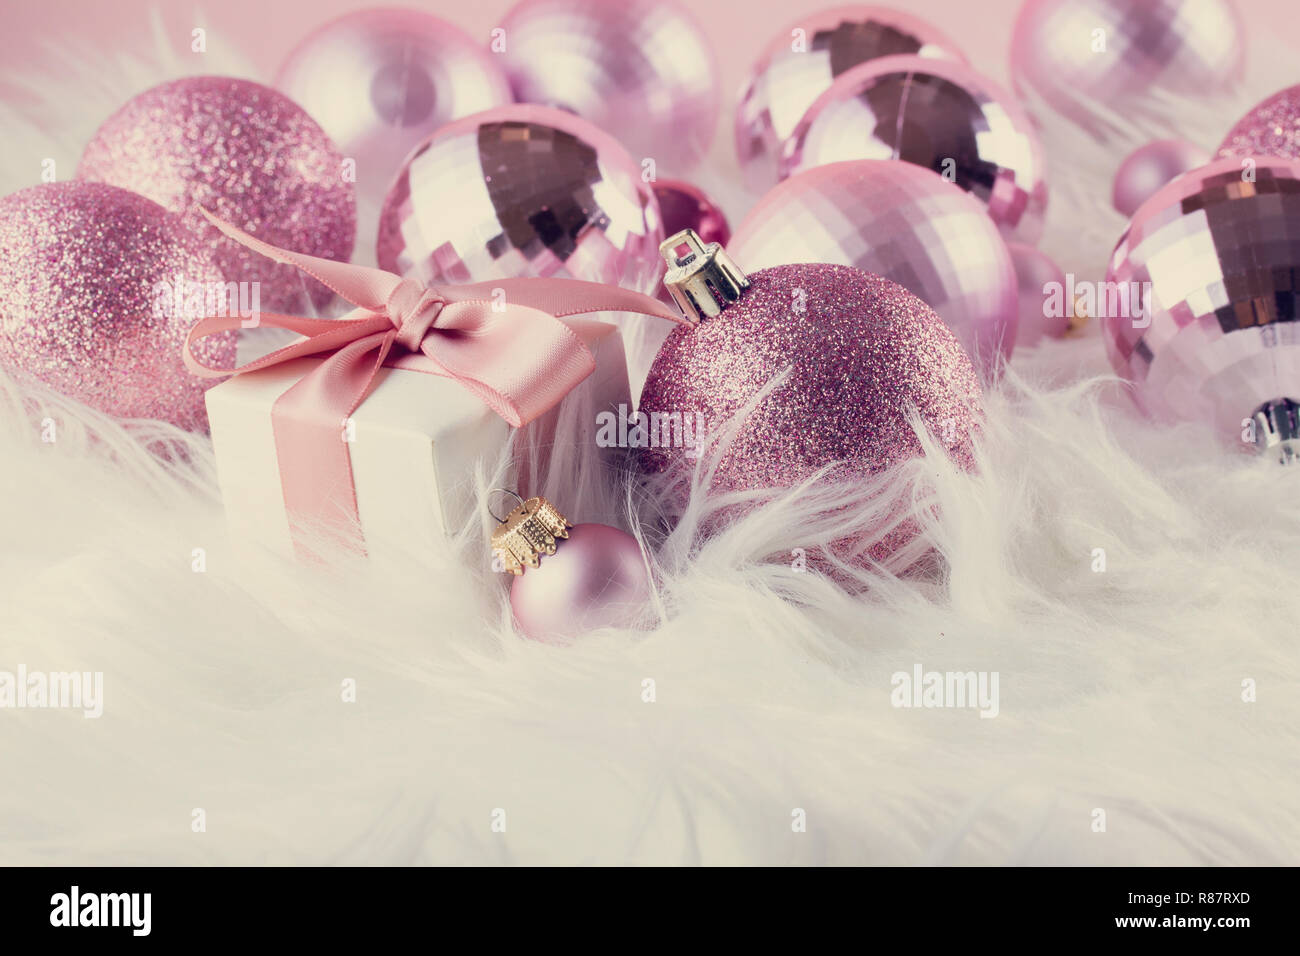 Pink Christmas decorations on white fur Stock Photo